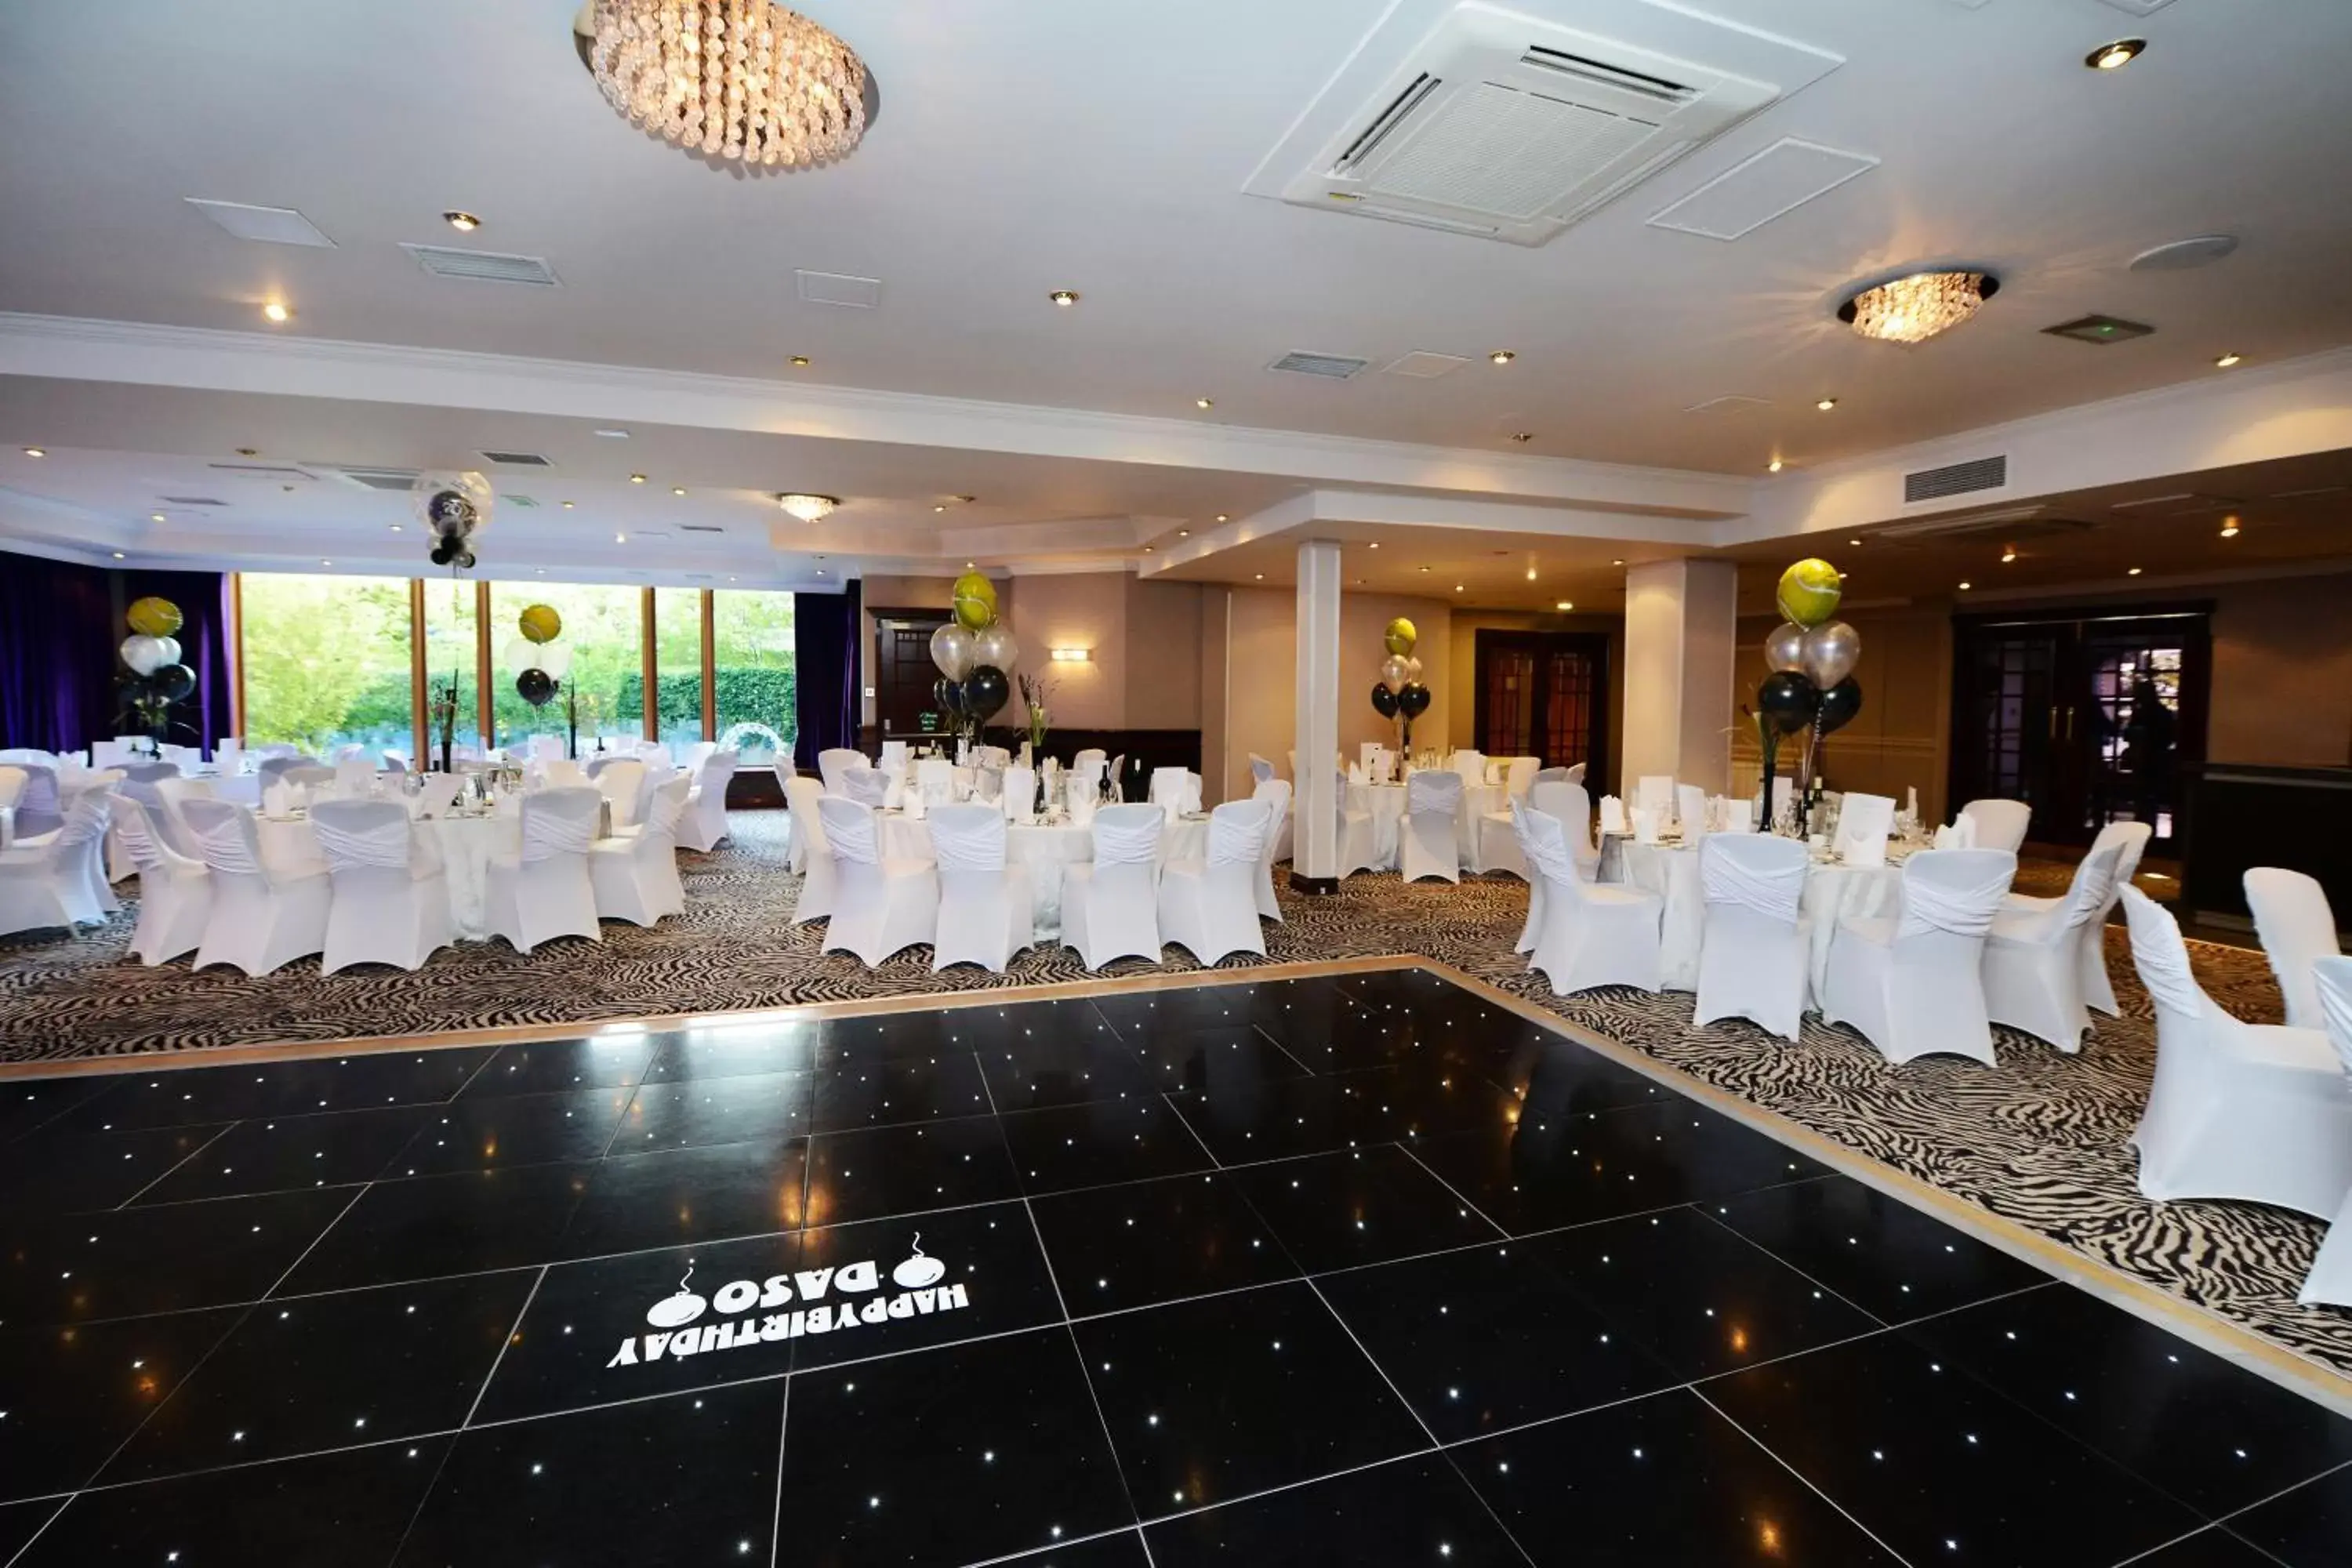 Business facilities in Glynhill Hotel & Spa near Glasgow Airport